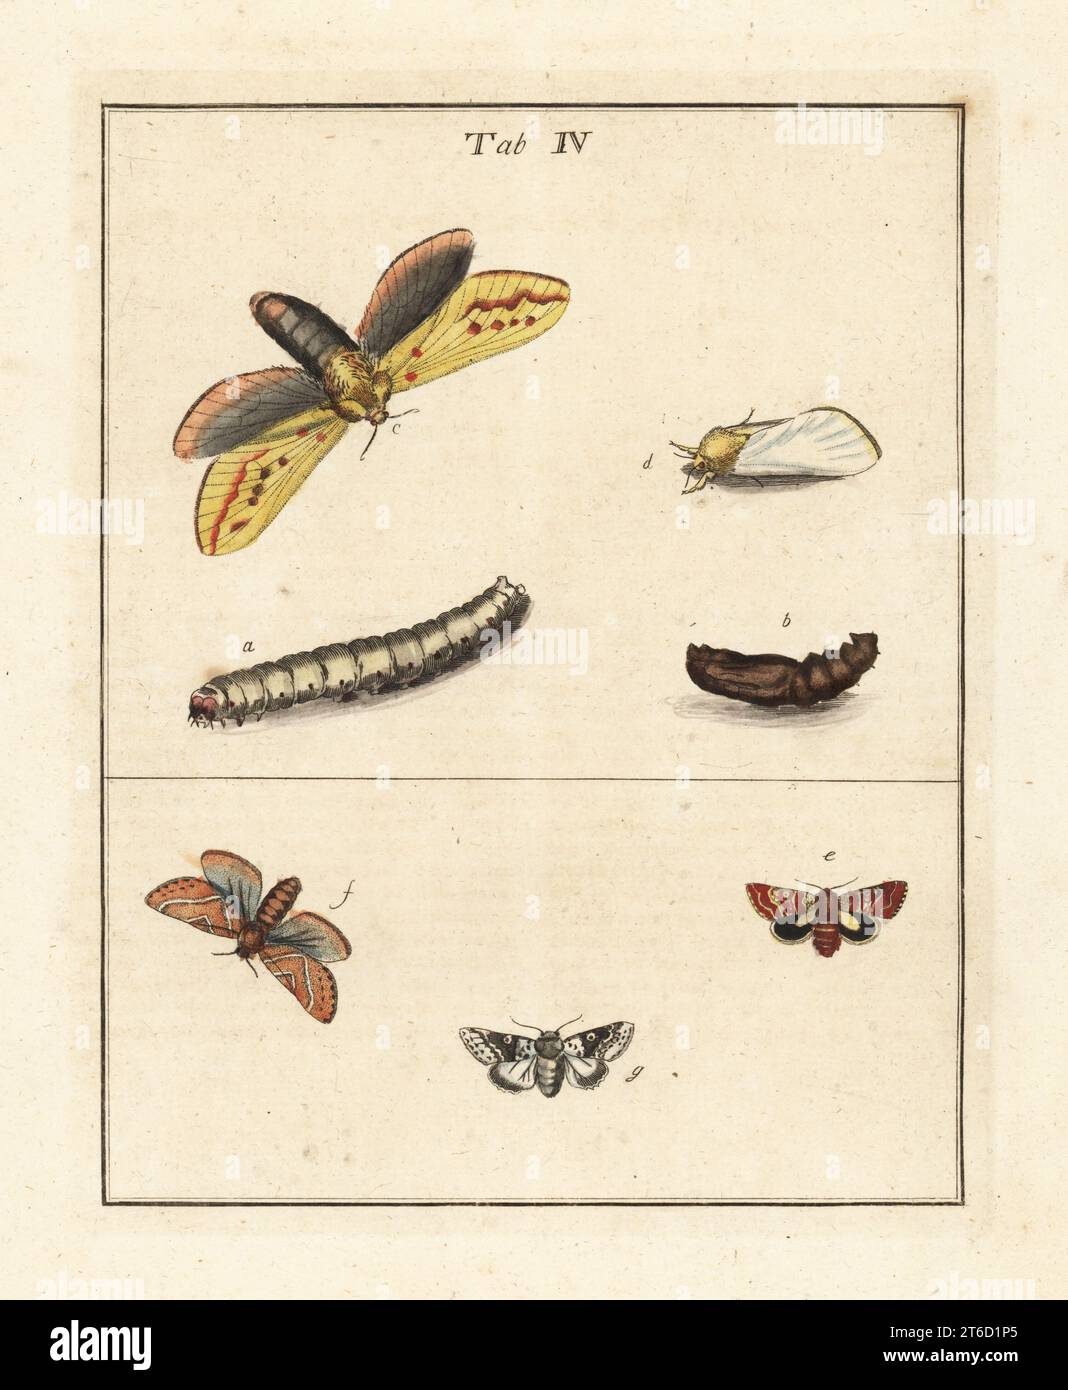 Ghost moth or ghost swift, Hepialus humuli, female c, male d, larva b and pupa a, beautiful yellow underwing, Anarta myrtilli e, gold swift, Phymatopus hecta f, unnamed moth species g. Handcoloured copperplate engraving drawn and engraved by Moses Harris from his own Exposition of English Insects, Including the several Classes of Neuroptera, Hymenoptera, Diptera, or Bees, Flies and Libellulae, White and Robson, London, 1782. Stock Photo